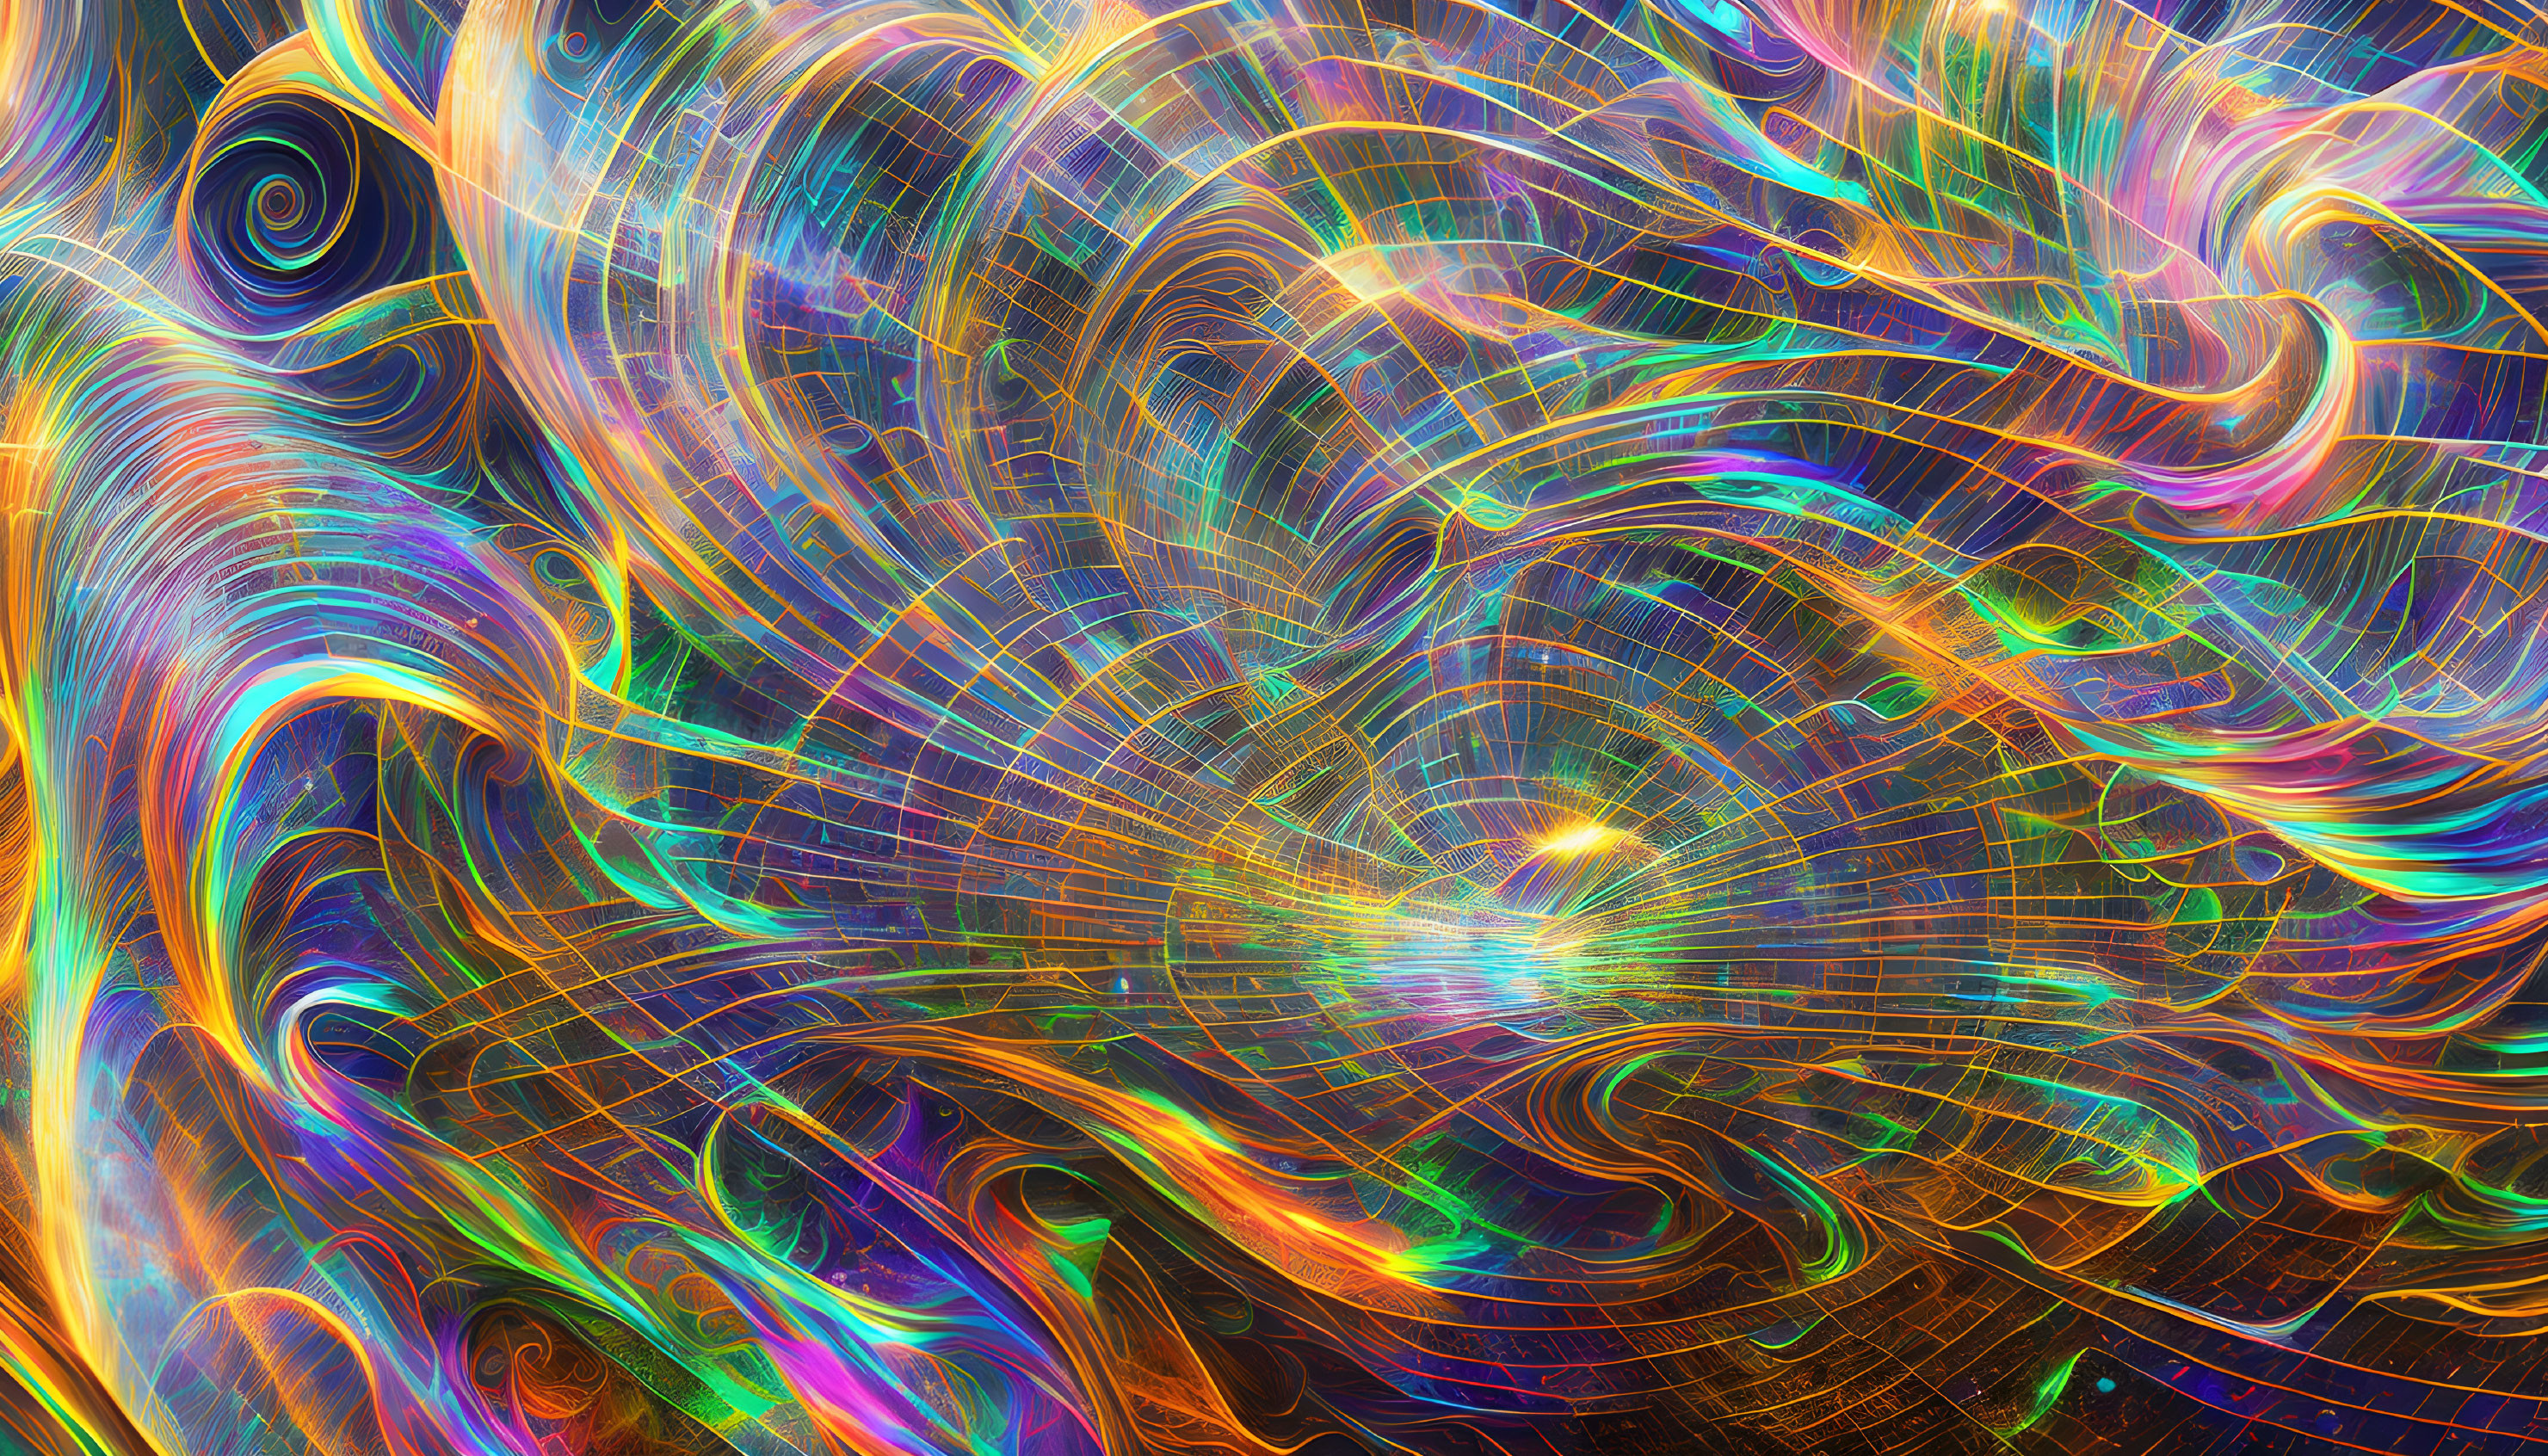 Colorful cosmic swirl digital art with iridescent colors and flowing lines.